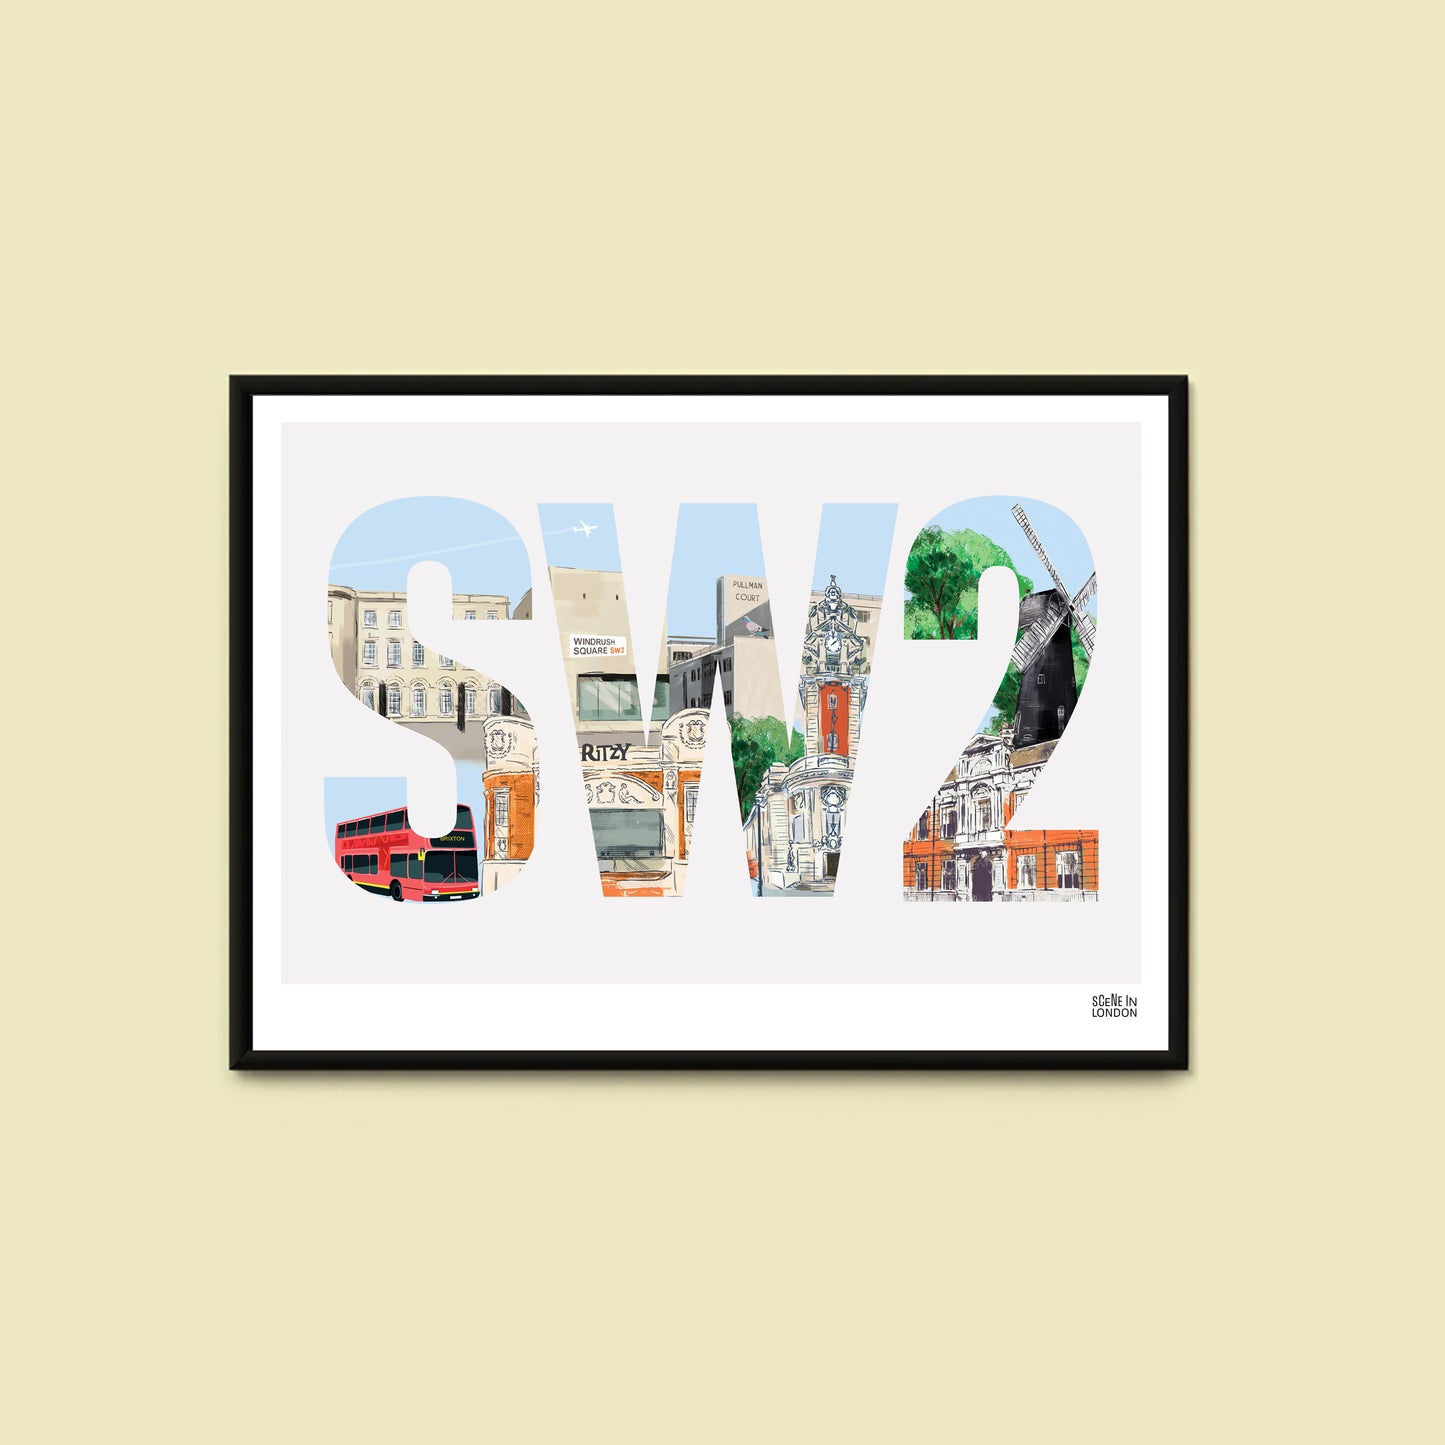 Brixton art print featuring places in SW2, London